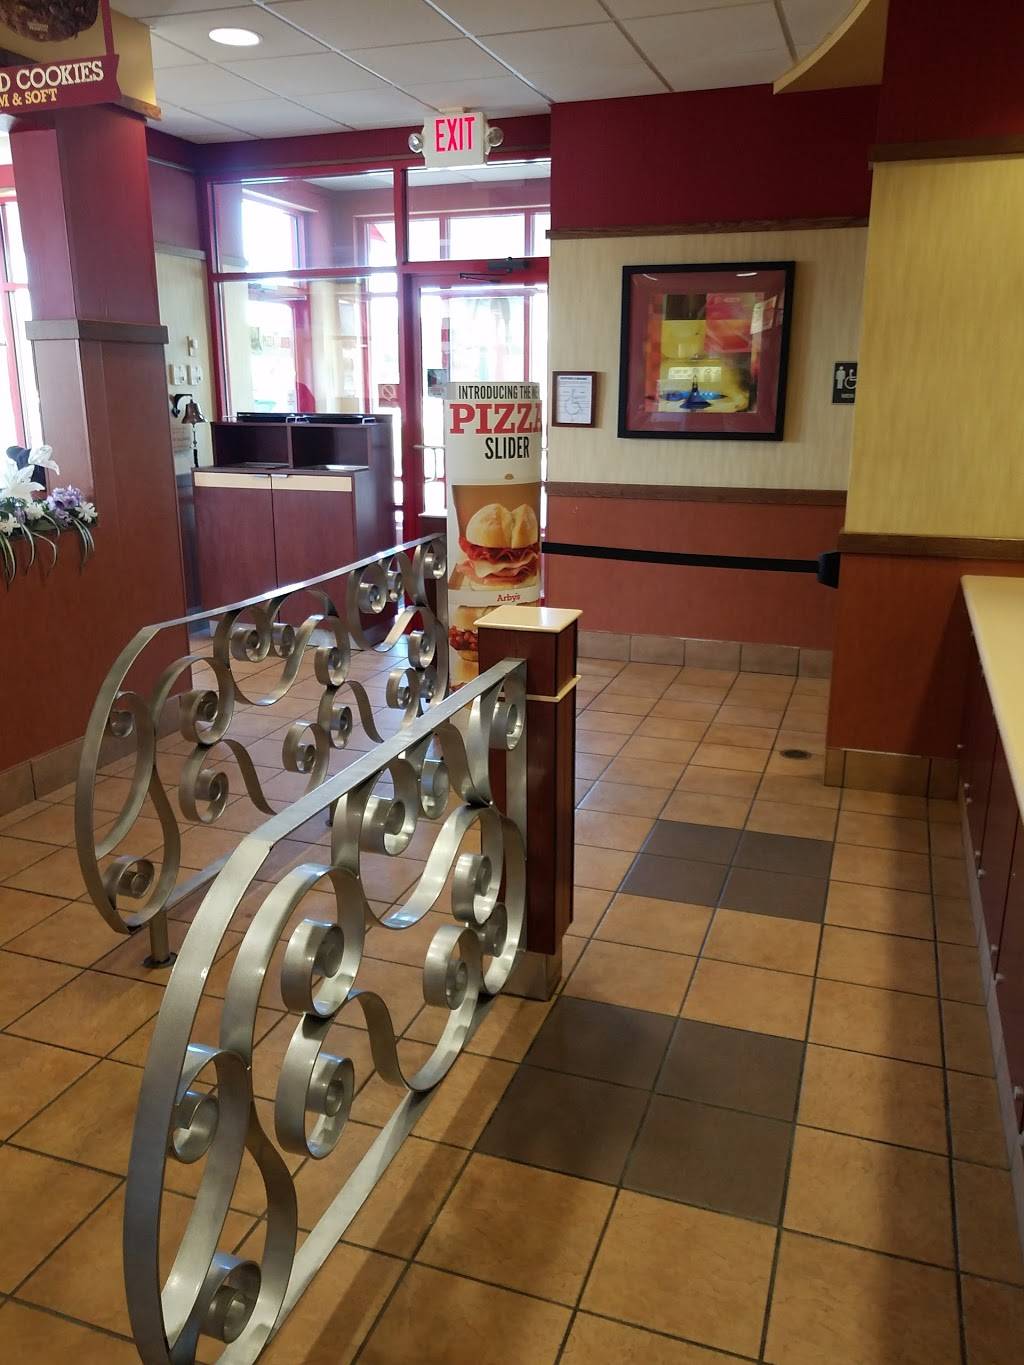 Arbys | restaurant | 2219 Mentor Ave, Painesville Township, OH 44077, USA | 4403548392 OR +1 440-354-8392